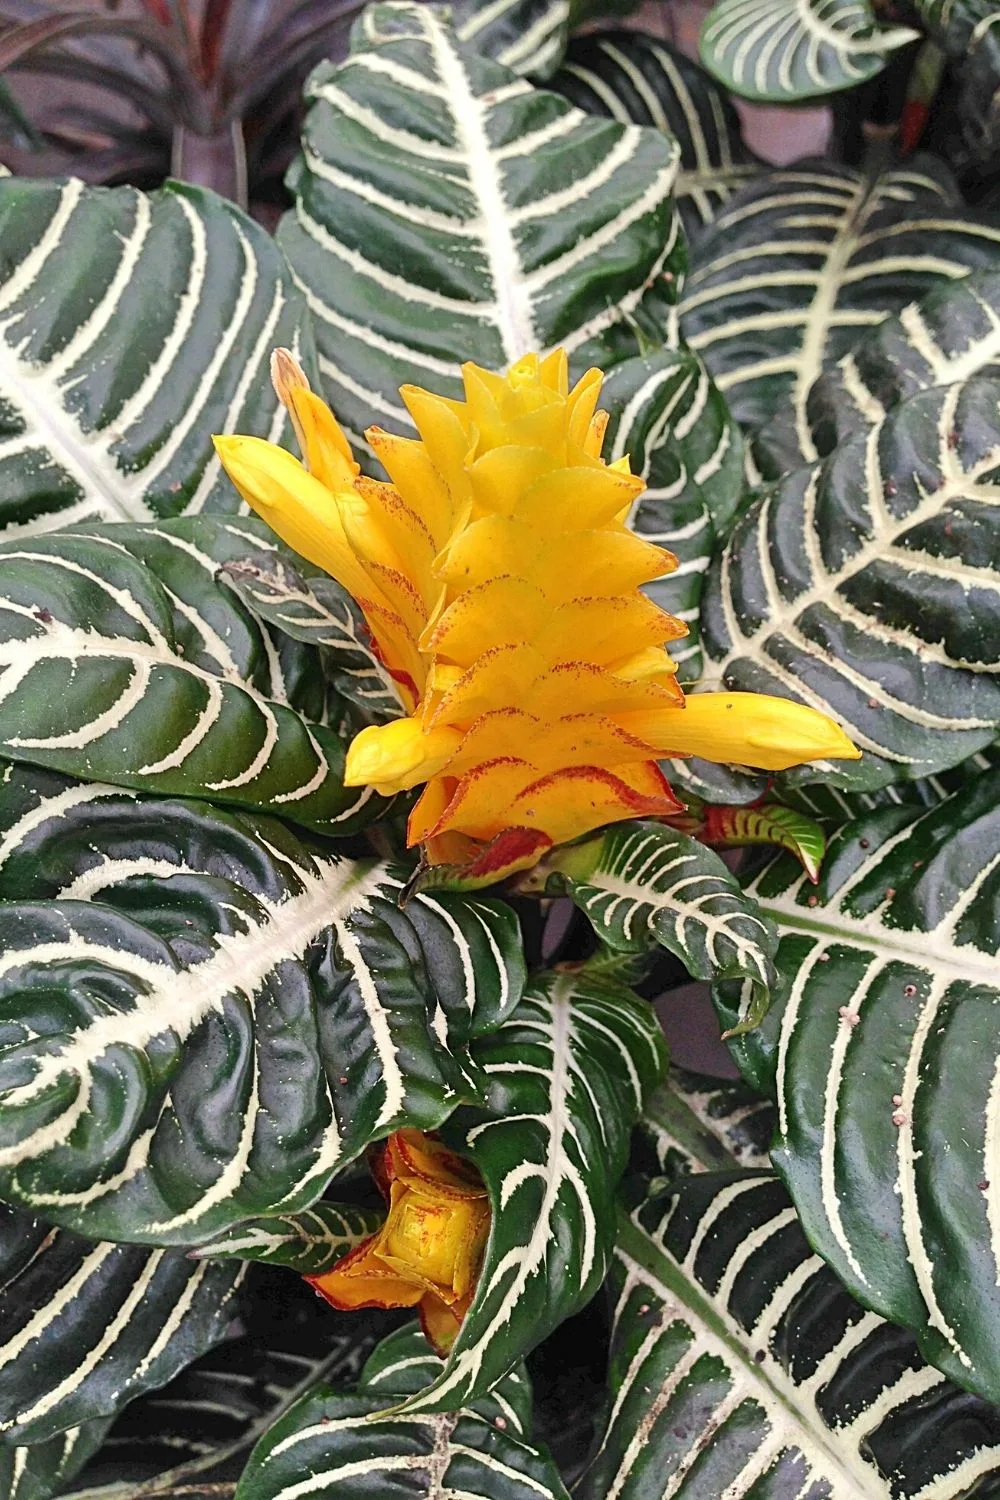 Despite being known for its big striped leaves, Zebra Plant (Aphelandra Squarrosa) is hard to grow